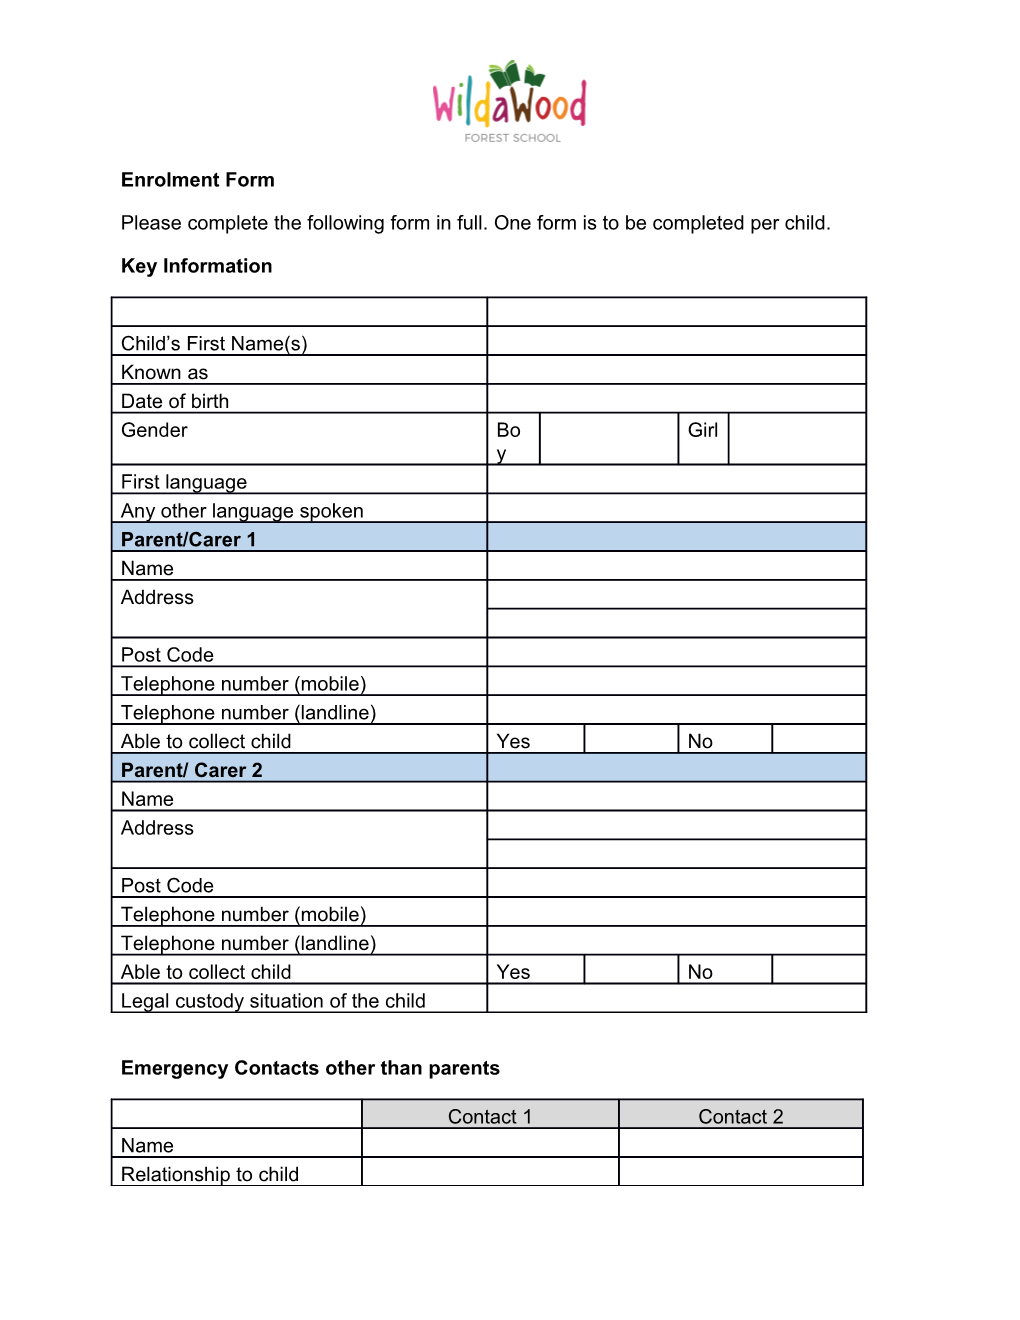 Please Complete the Following Form in Full. One Form Is to Be Completed Per Child